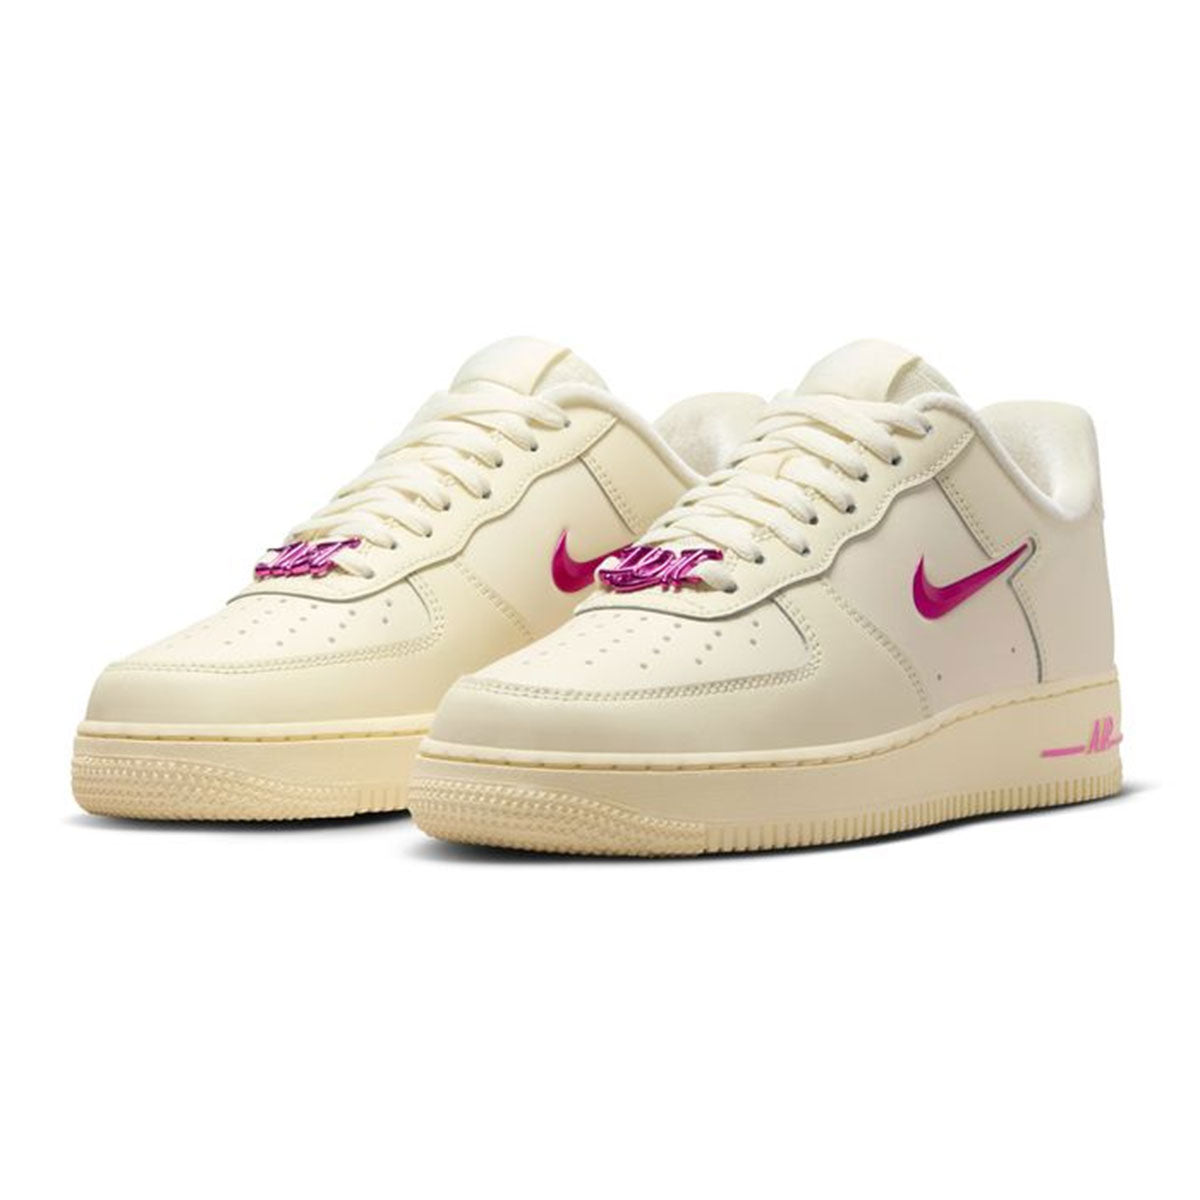 NIKE WMNS AIR FORCE 1 '07 SE JUST DO IT Nike Women's Air Force 1 '07 SE Just Do It [FB8251-101]